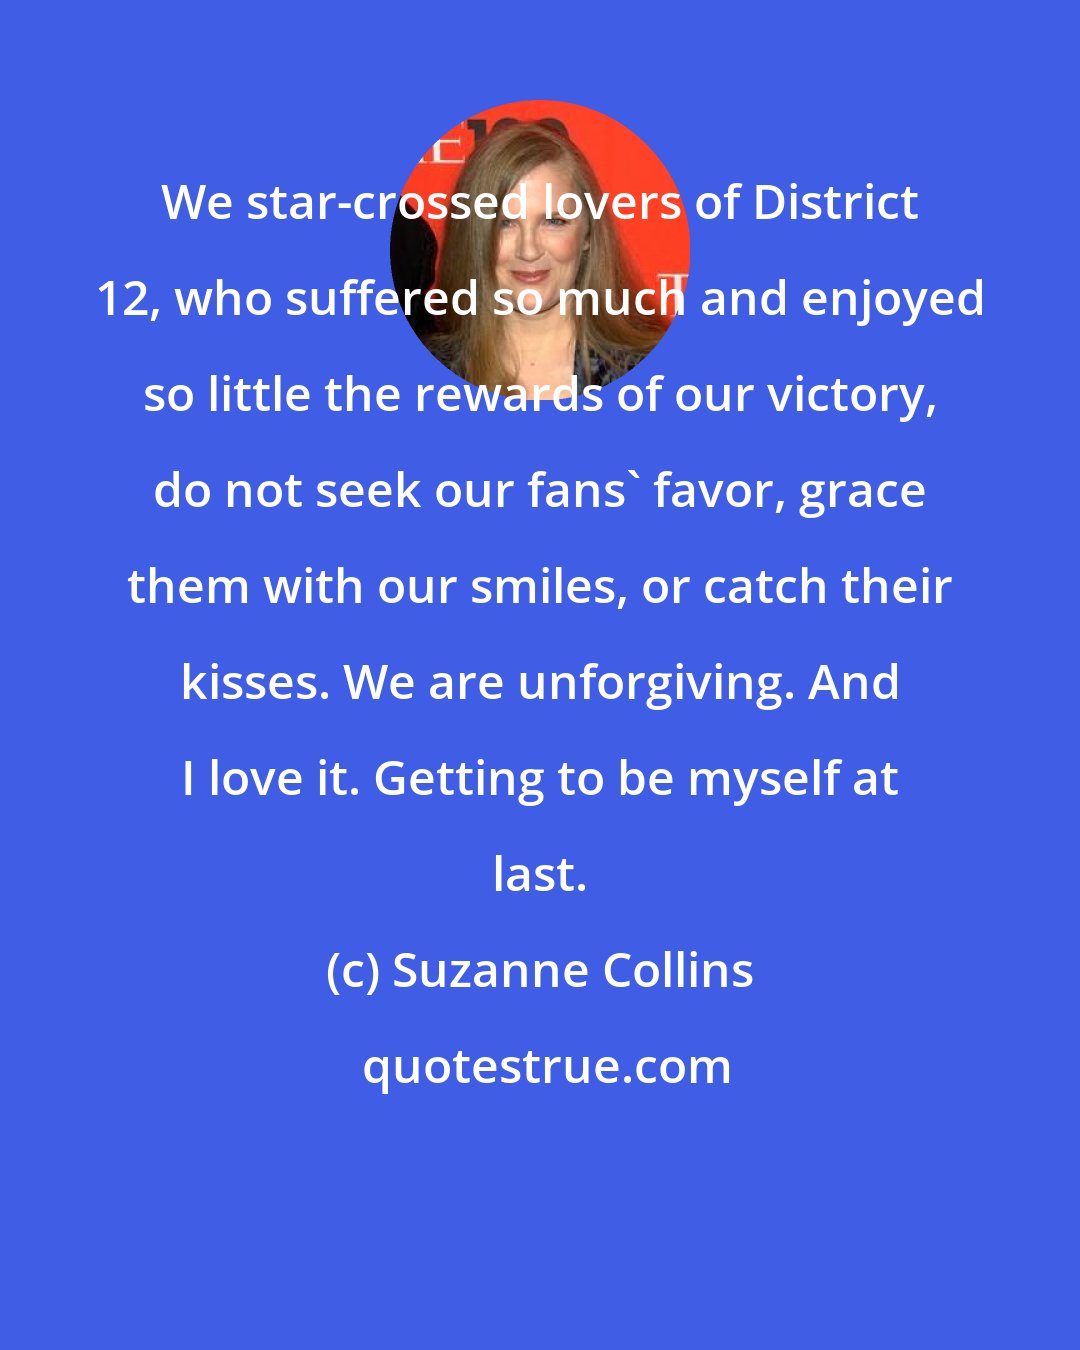 Suzanne Collins: We star-crossed lovers of District 12, who suffered so much and enjoyed so little the rewards of our victory, do not seek our fans' favor, grace them with our smiles, or catch their kisses. We are unforgiving. And I love it. Getting to be myself at last.